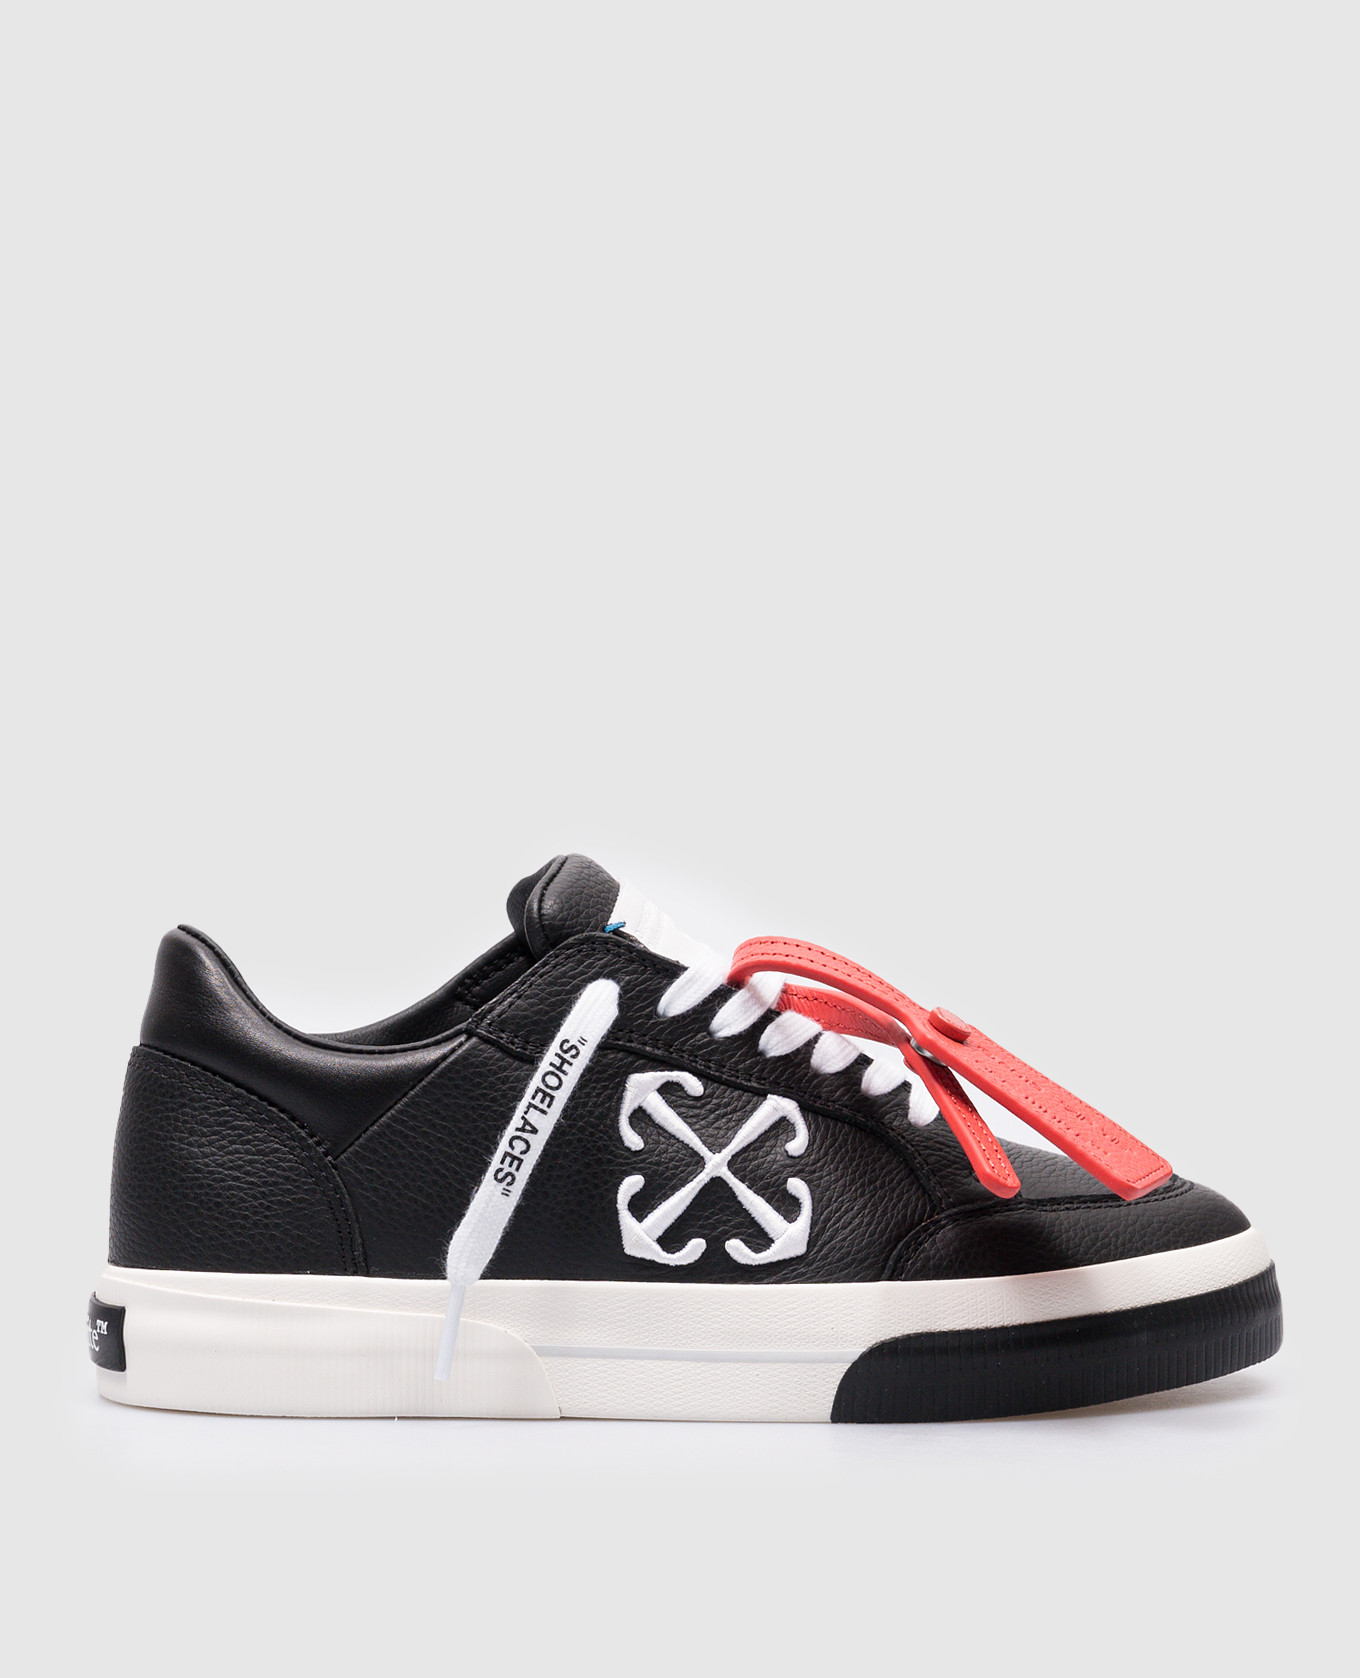 Low Vulcanized black leather sneakers